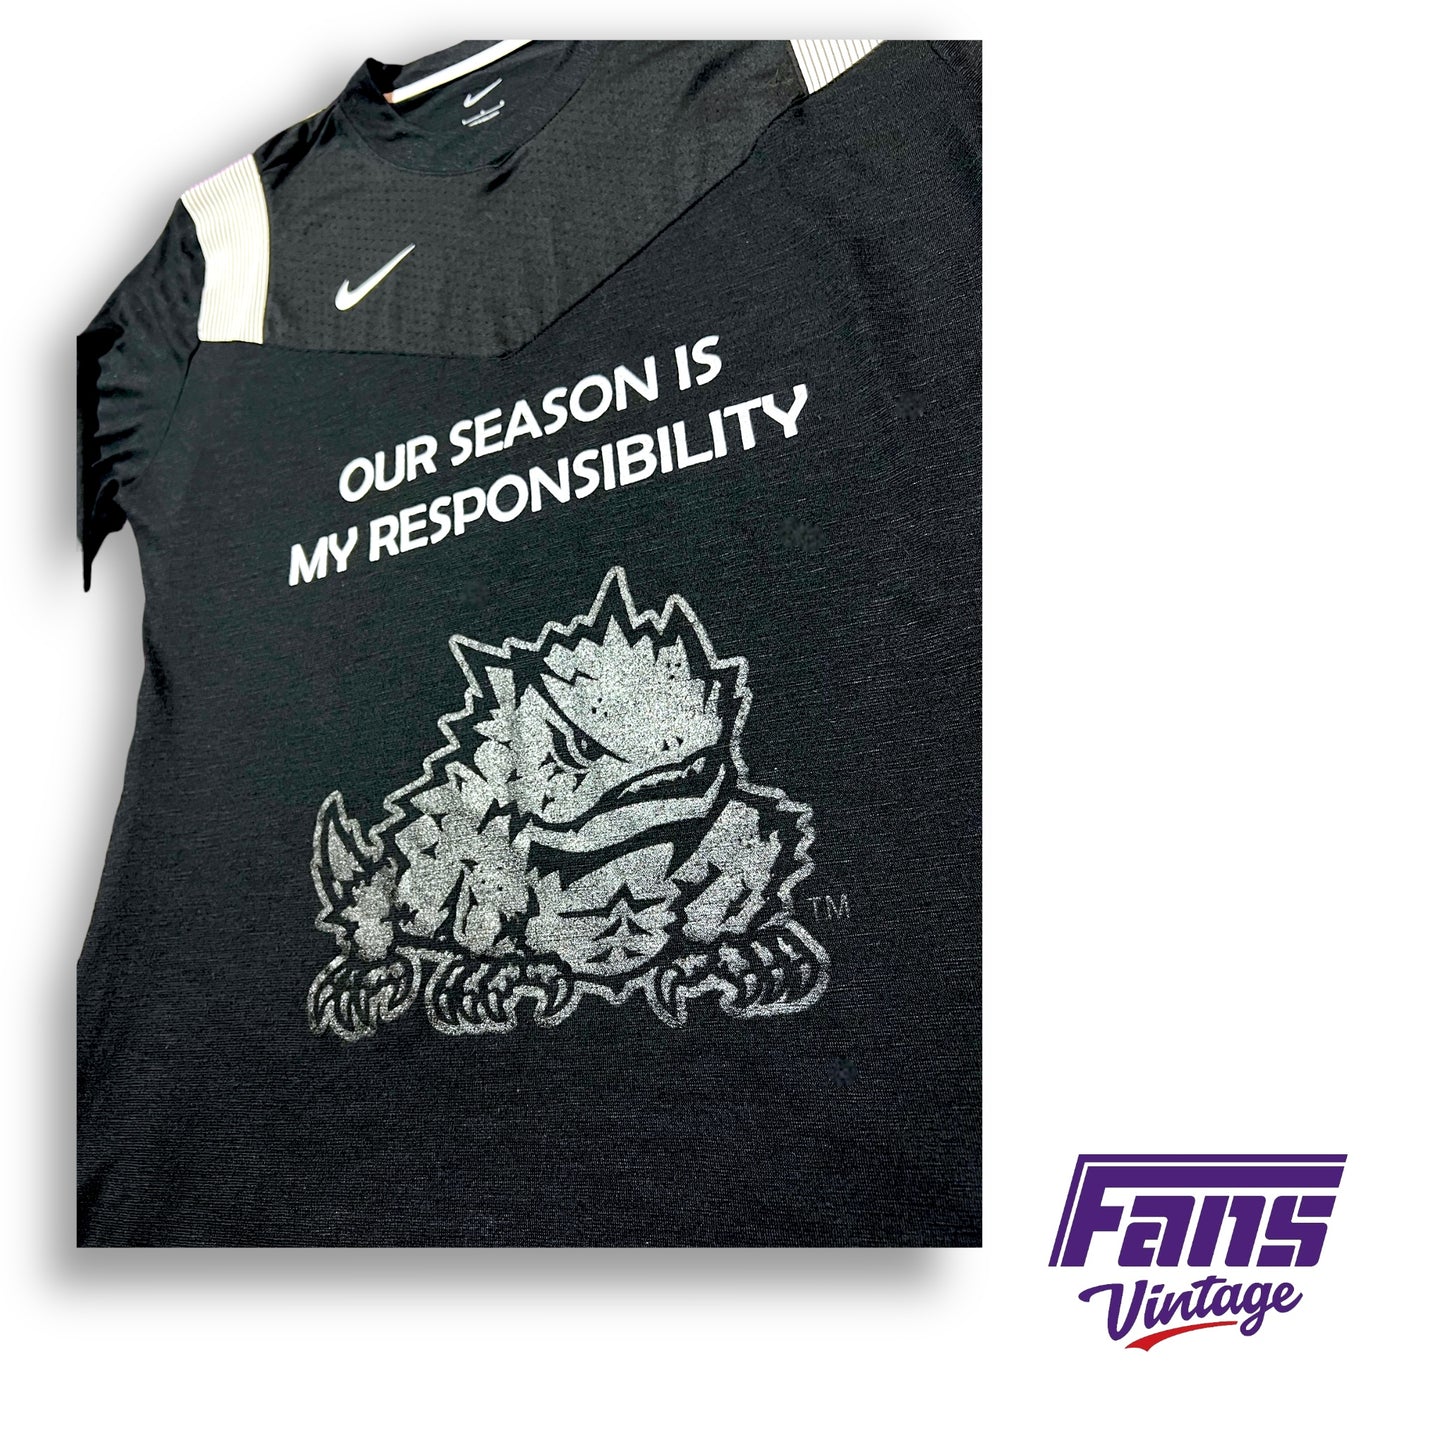 RARE - TCU Football Team Exclusive “Our Season is My Responsibility / BE INTENTIONAL” Premium Nike Training Shirt - Double Sided!